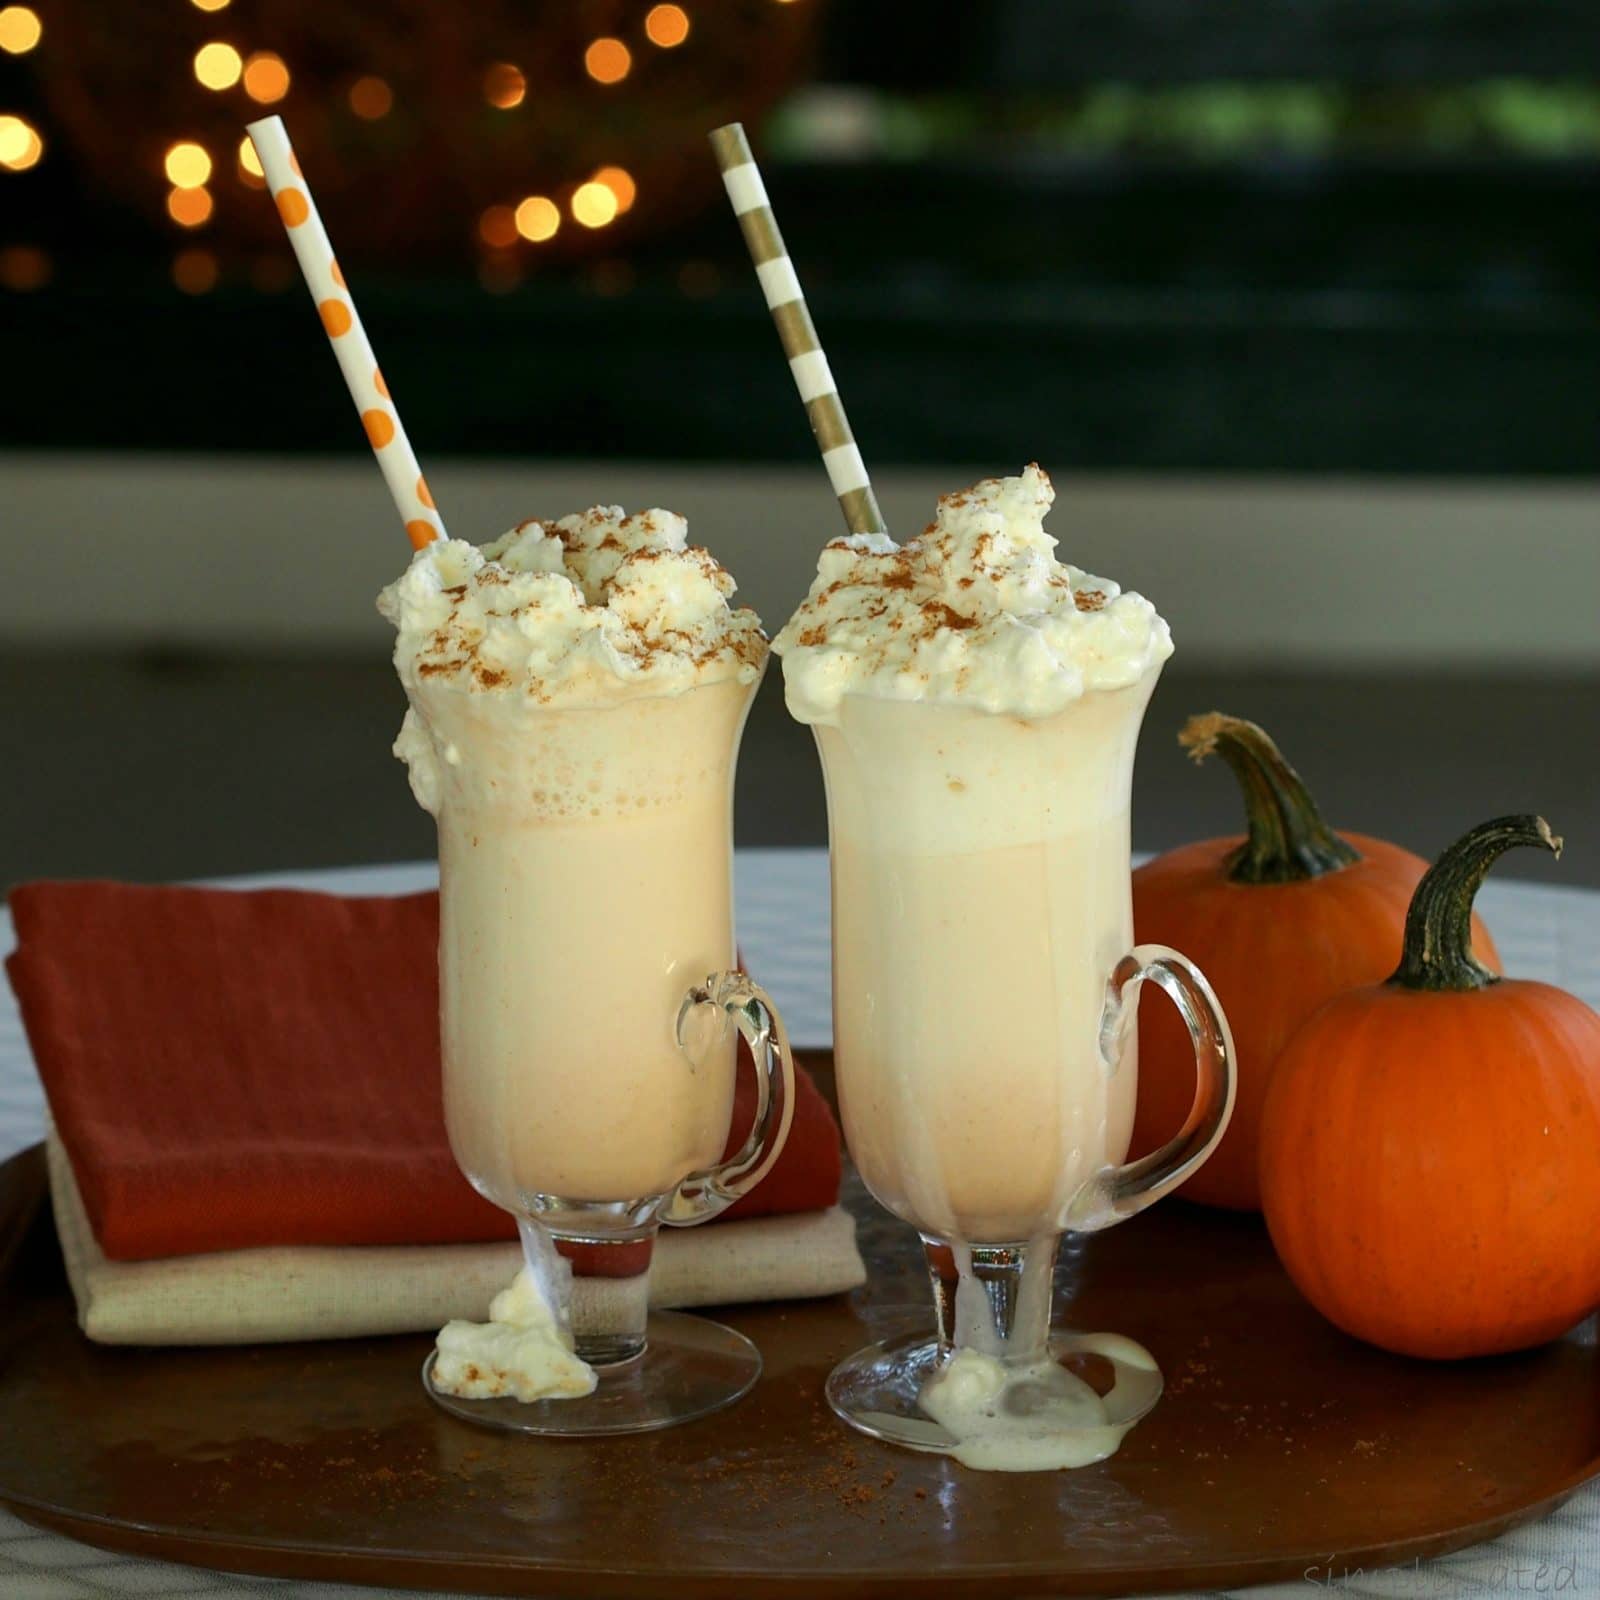 Pumpkin Pie Hot Chata is the taste of fall and the perfect sip for a cool evening. simplysated